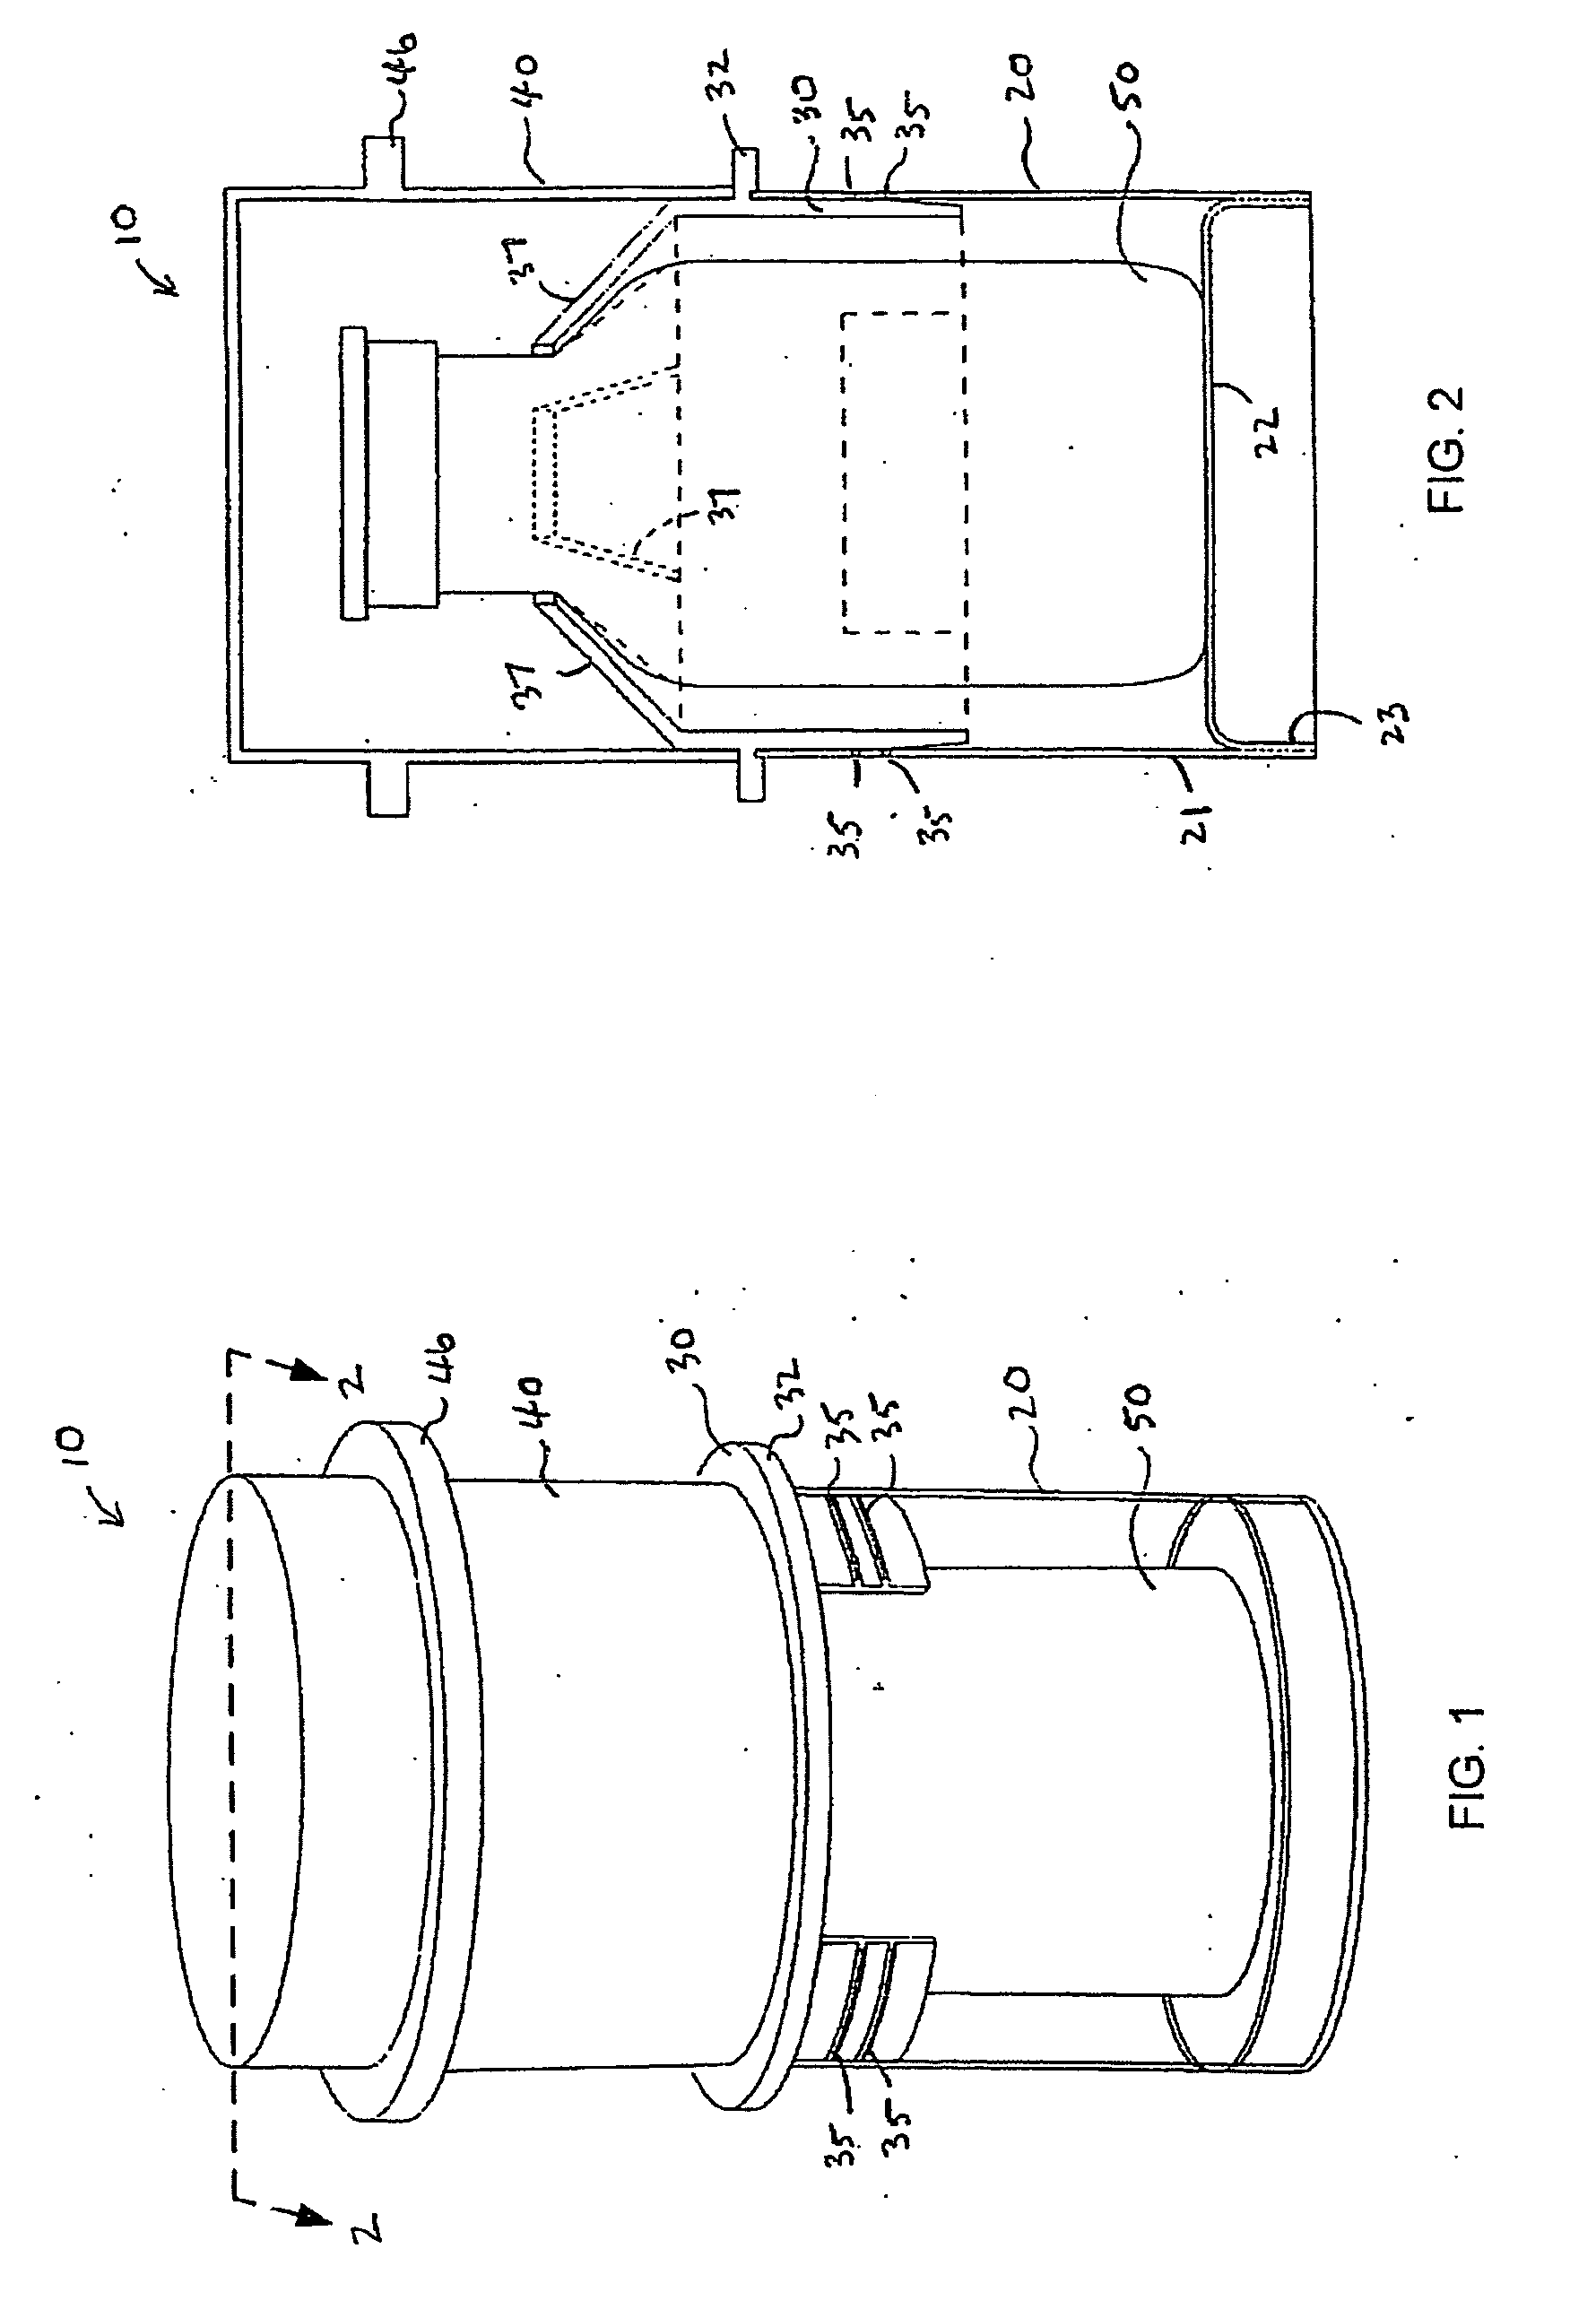 Protective outer enclosure for pharmaceutical vial